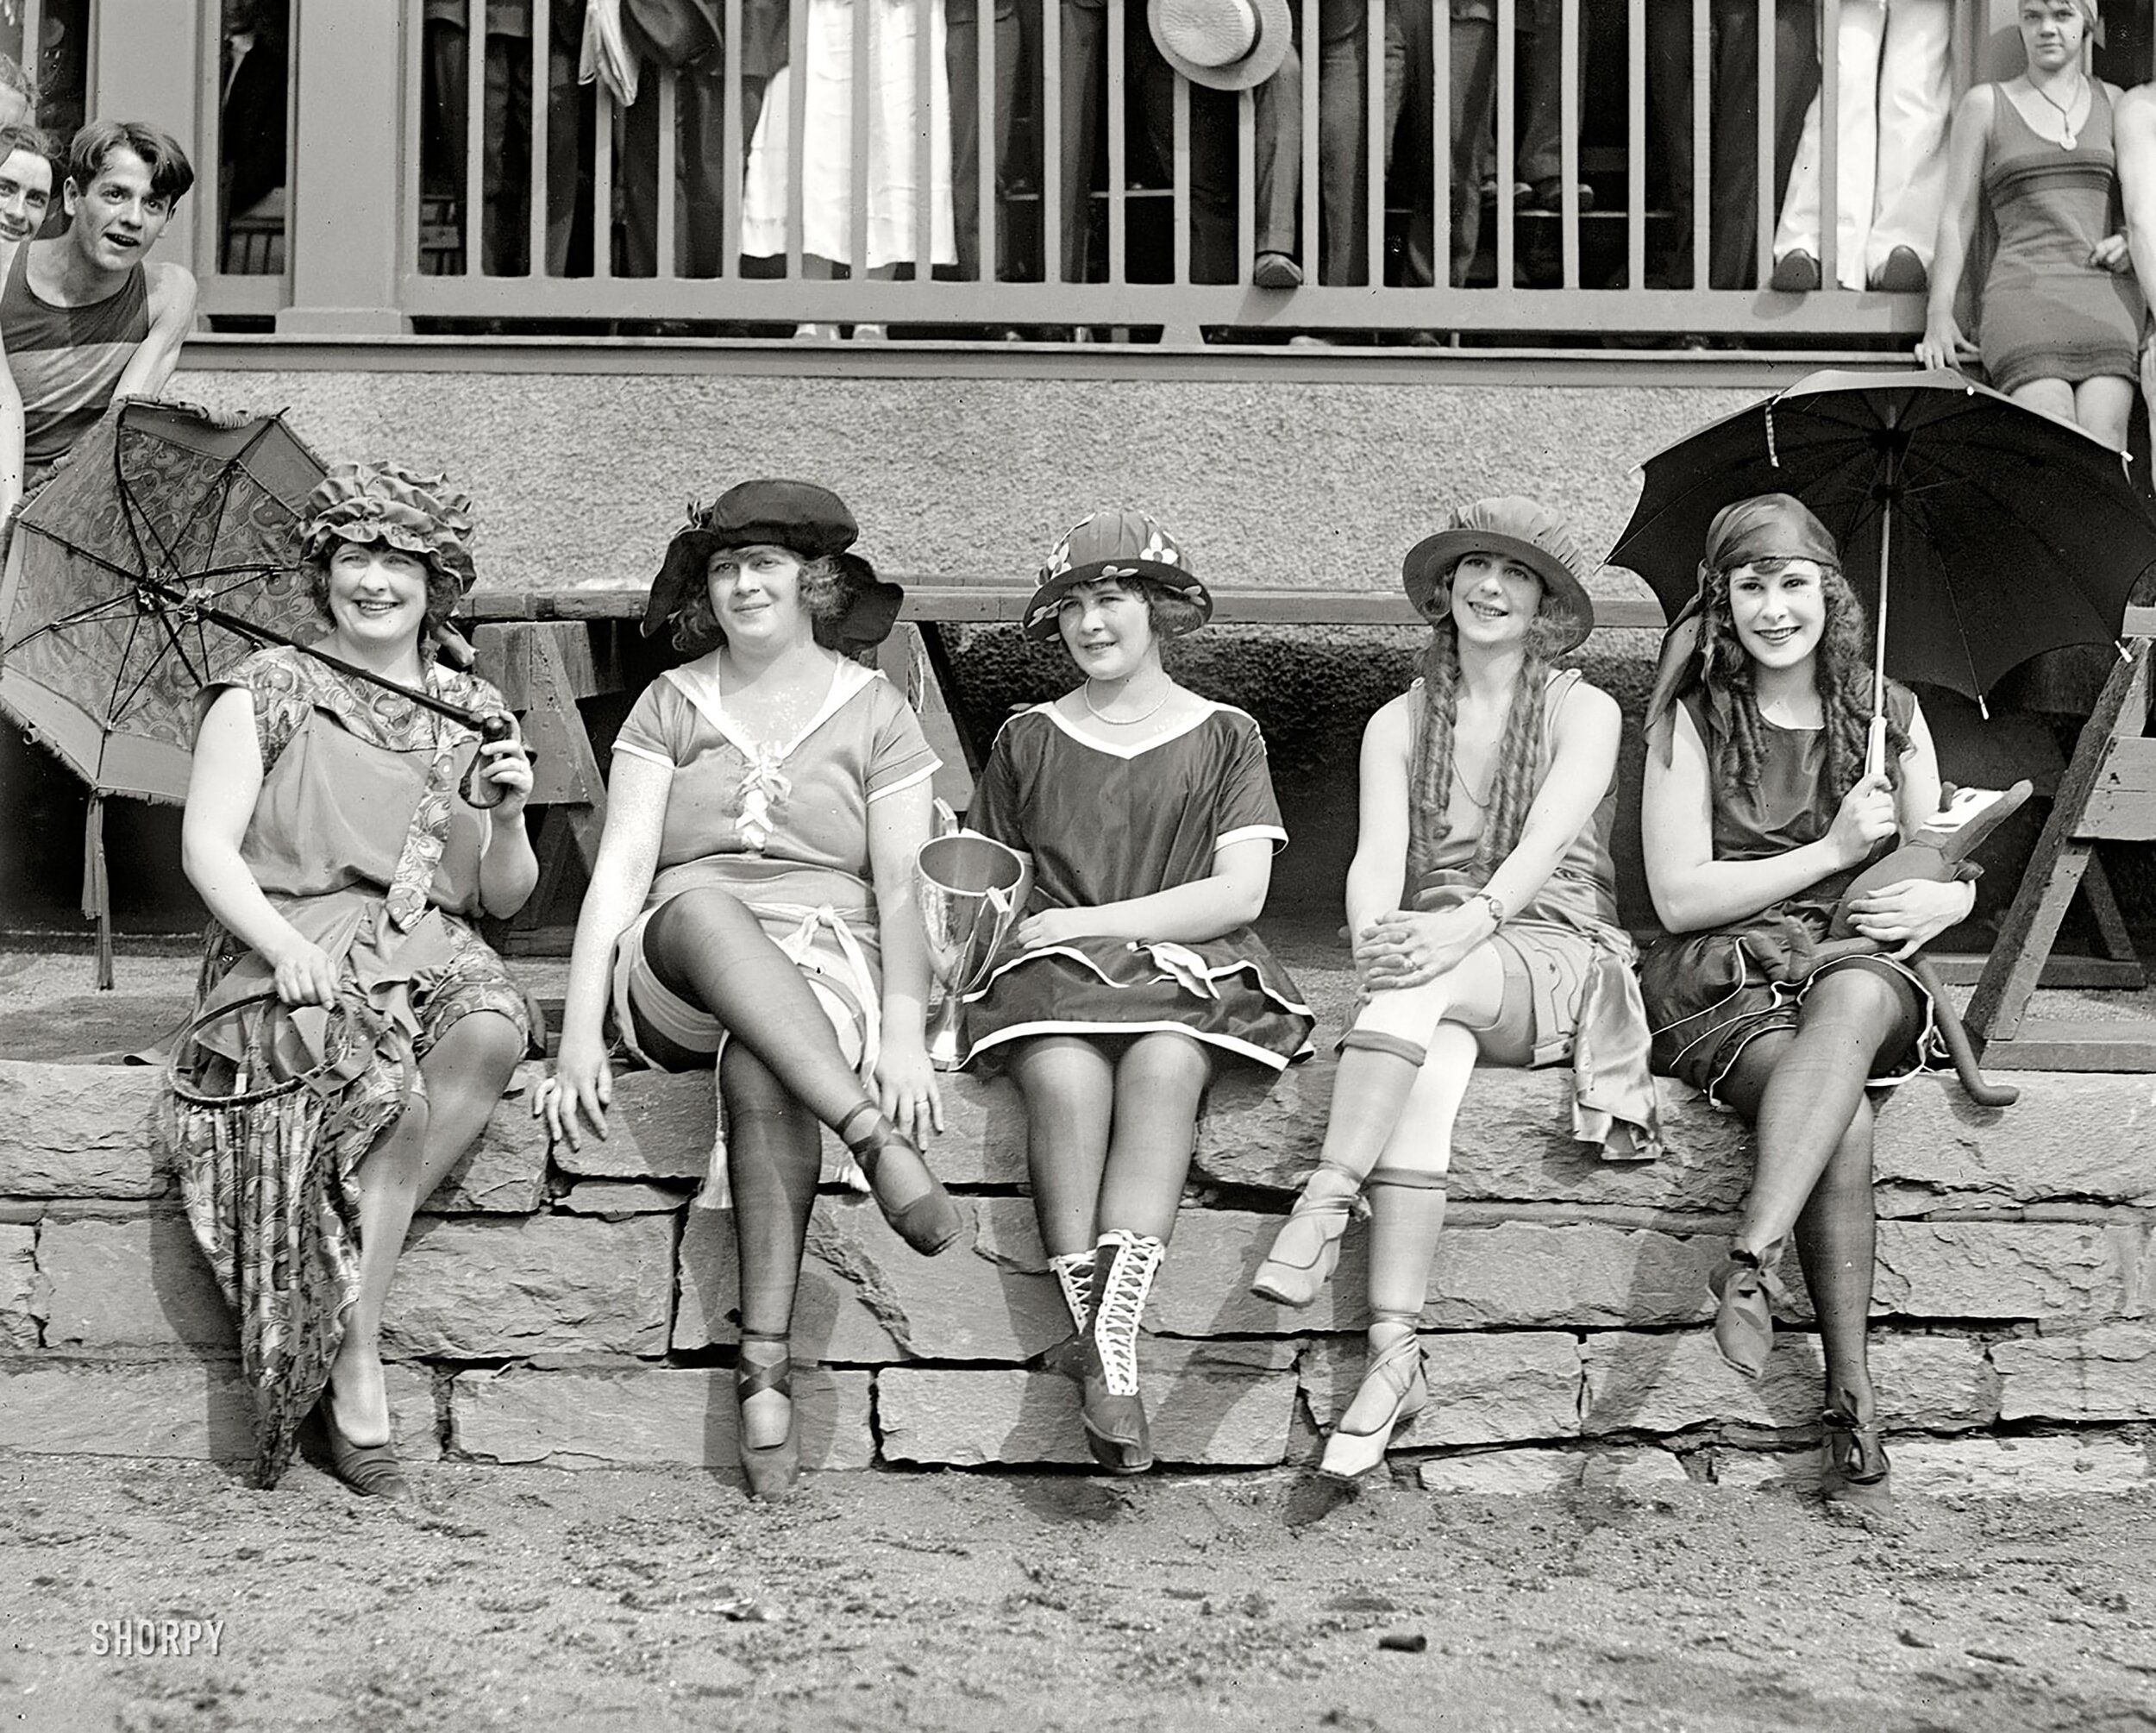 18-1921-bathing-costume-contest-with-krazykat-doll.jpg